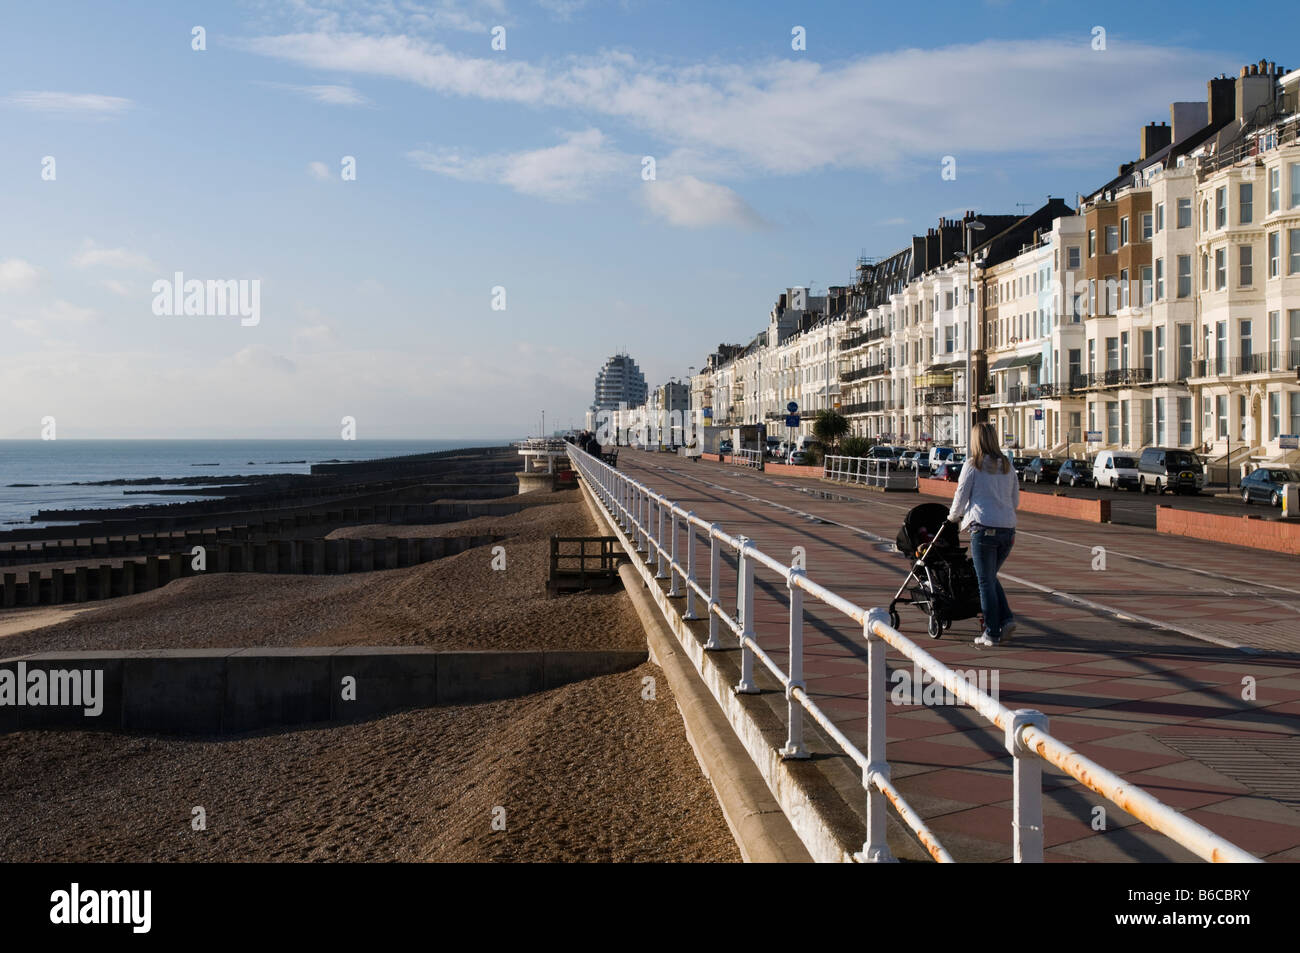 UNITED KINGDOM, ENGLAND, 9th December 2008. The seafront at Hastings on the East Sussex coast. Stock Photo